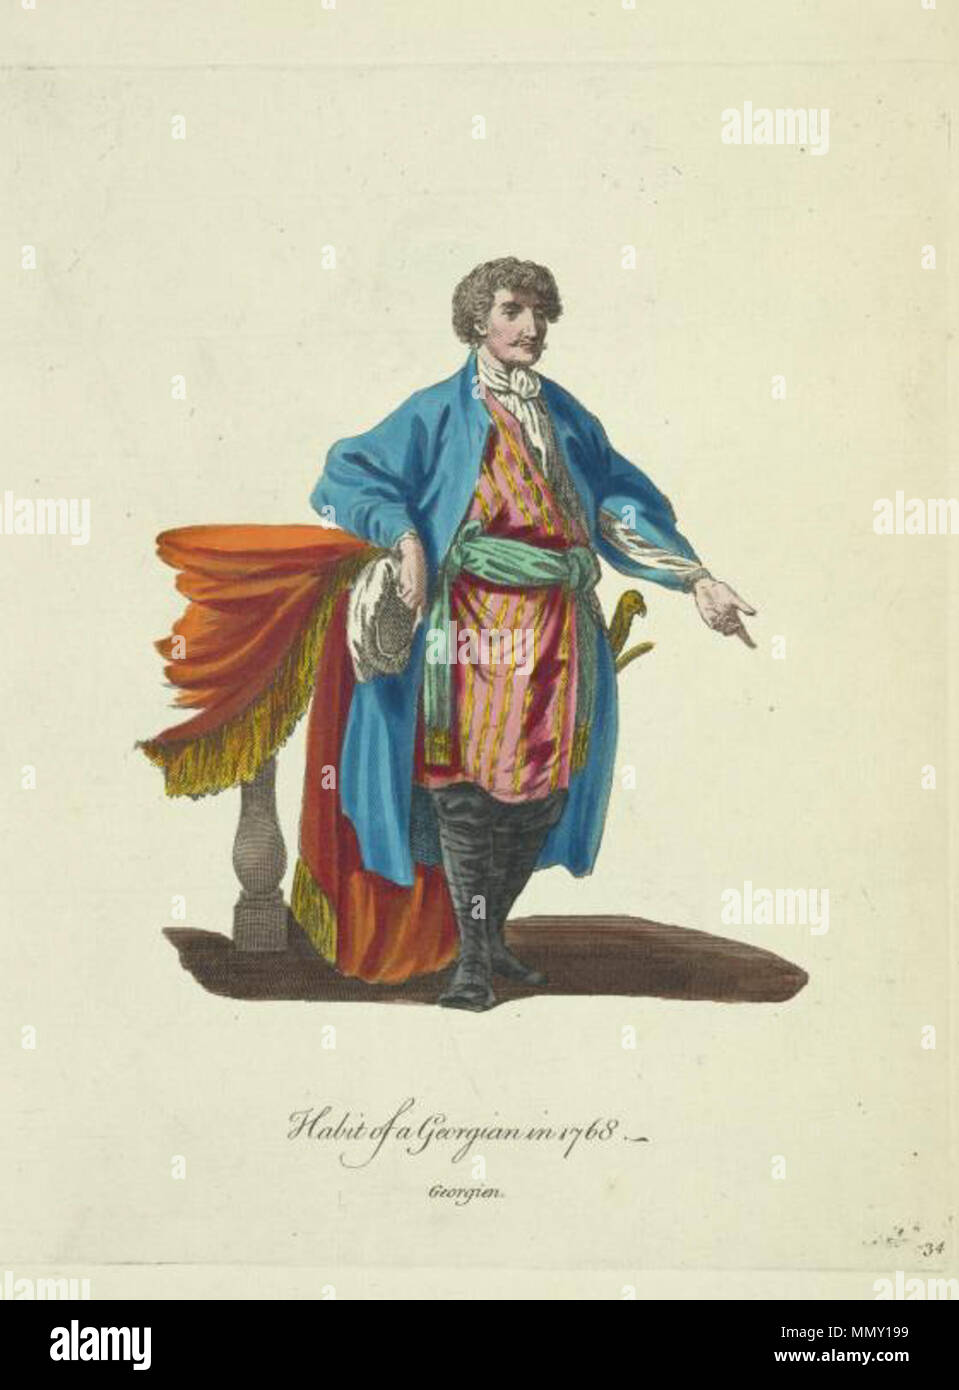 . English: 'Habit of a Georgian in 1768. Georgien.'. From A Collection of the Dresses of Different Nations, Antient and Modern, particularly Old English Dresses.... London: Thomas Jefferys, 1757-72.  . 1768.   Jean-Baptiste Le Prince  (–1781)    Description French painter and engraver  Date of birth/death 17 September 1734 / 17 May 1734 30 September 1781  Location of birth/death Metz Saint-Denis-du-Port  Authority control  : Q562013 VIAF:?44571706 ISNI:?0000 0001 2130 6189 ULAN:?500026693 LCCN:?n86031795 WGA:?LE PRINCE, Jean-Baptiste WorldCat Georgian in 1768 (Le Prince) Stock Photo